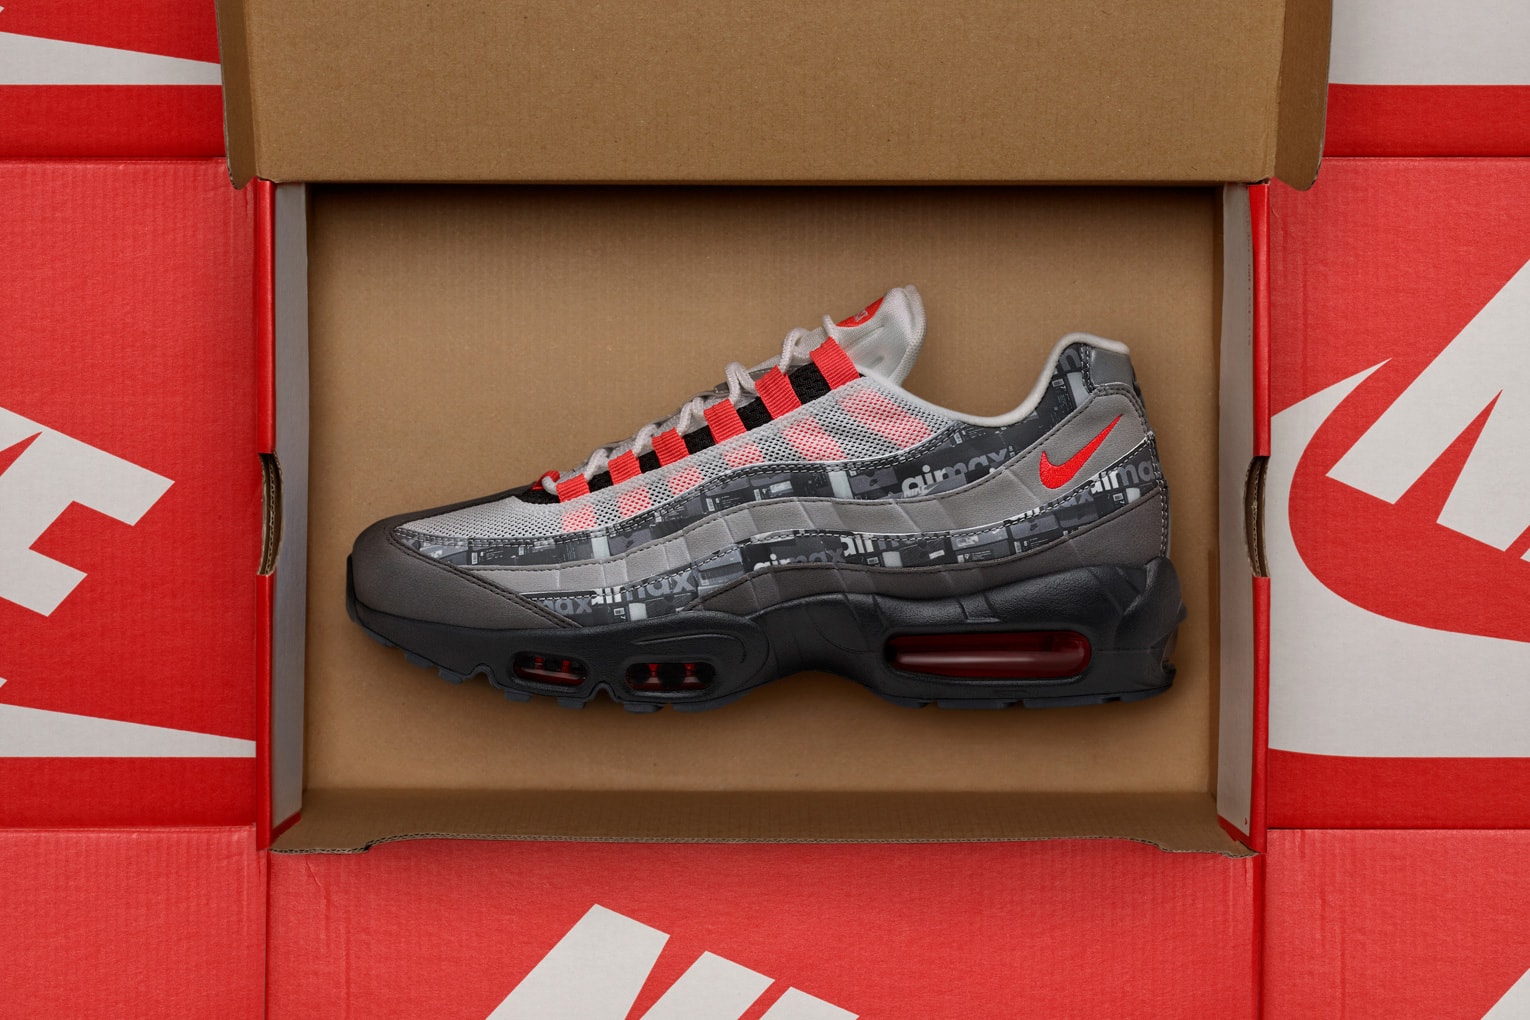 atmos Nike We Love Nike Collection 2018 june footwear Air Max 1 Air Max 95 Air Max 90 nike sportswear